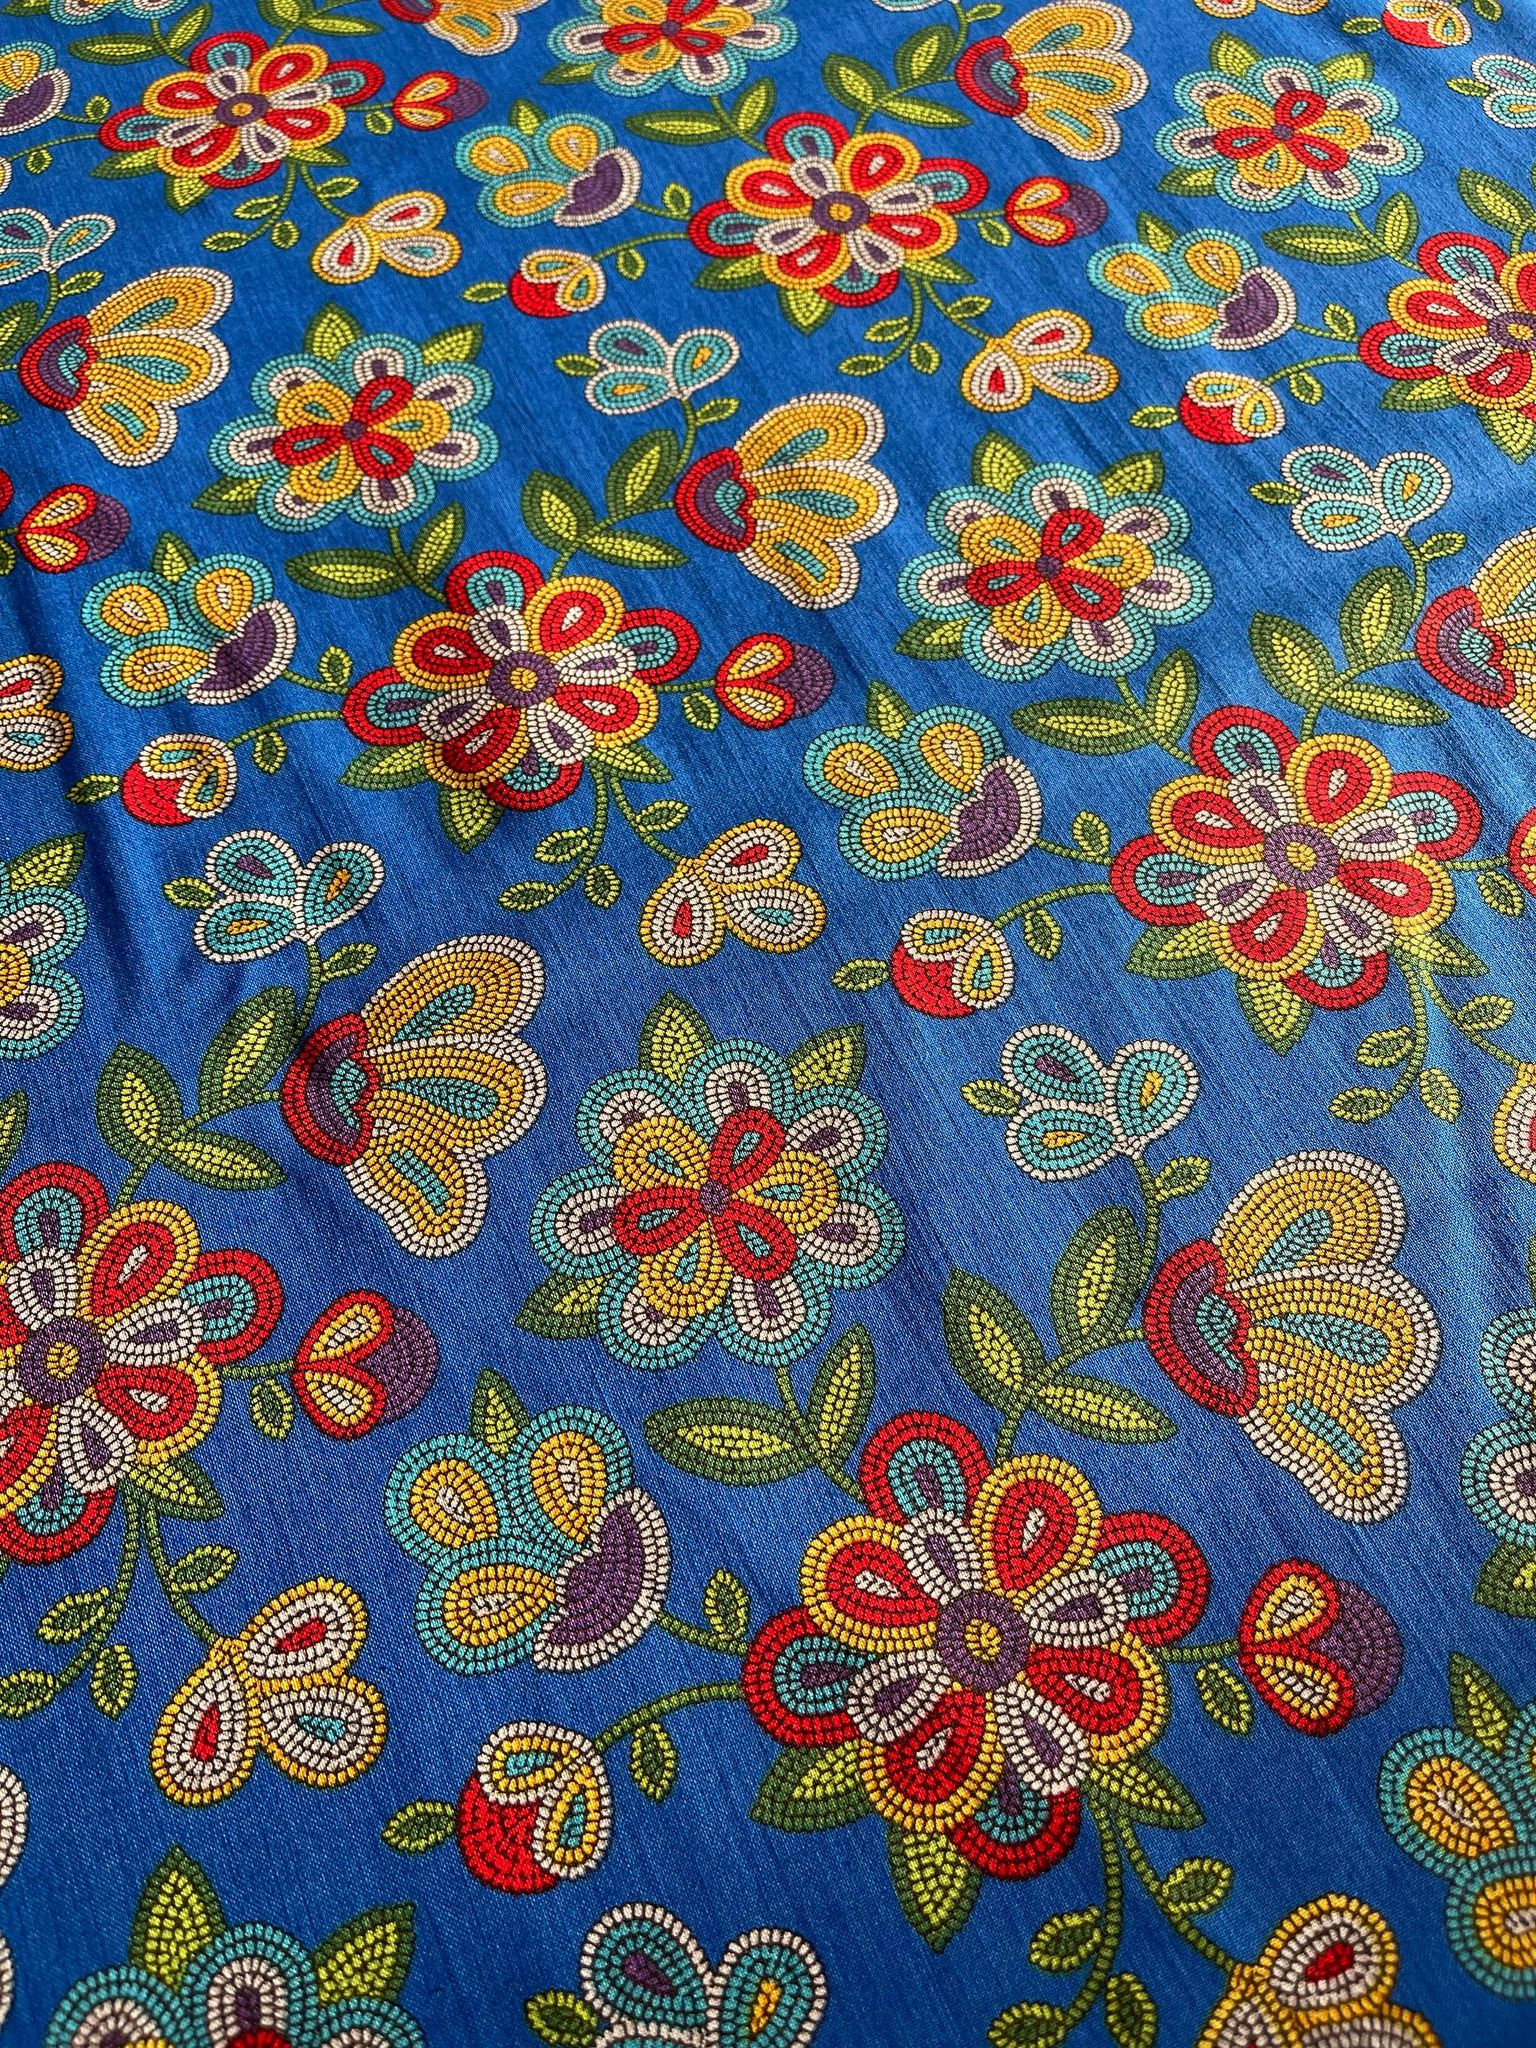 Royal Tucson Beaded Floral Design Cotton Fabric